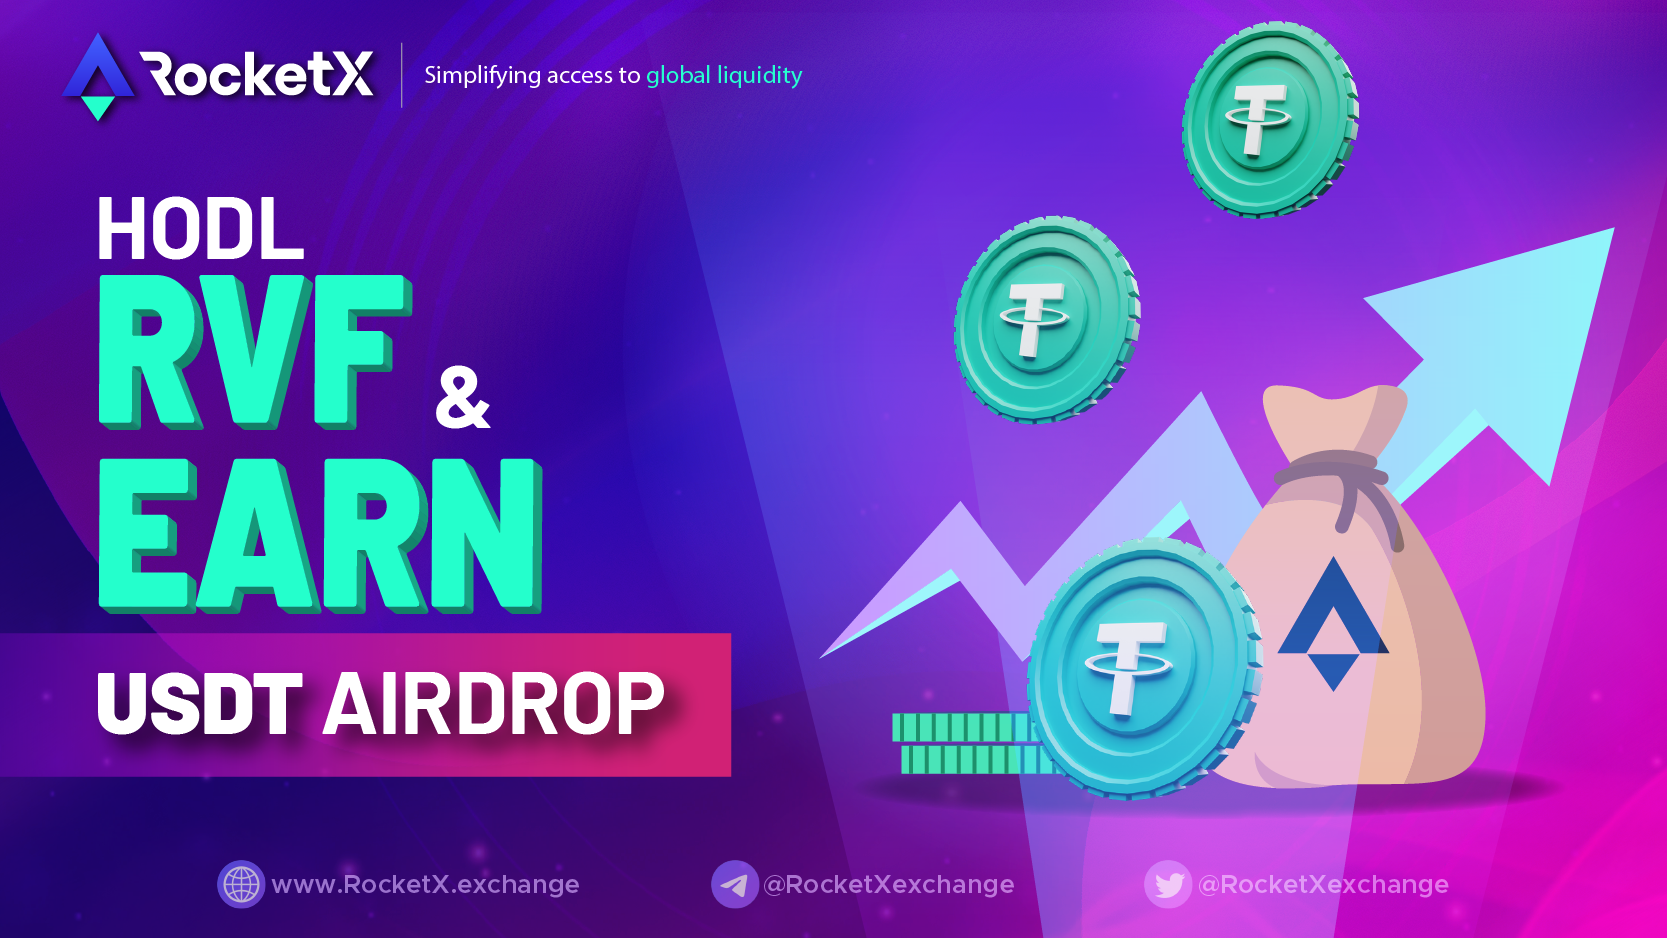 HODL RVF crypto tokens of RocketX Exchange, to earn USDT airdrop and more